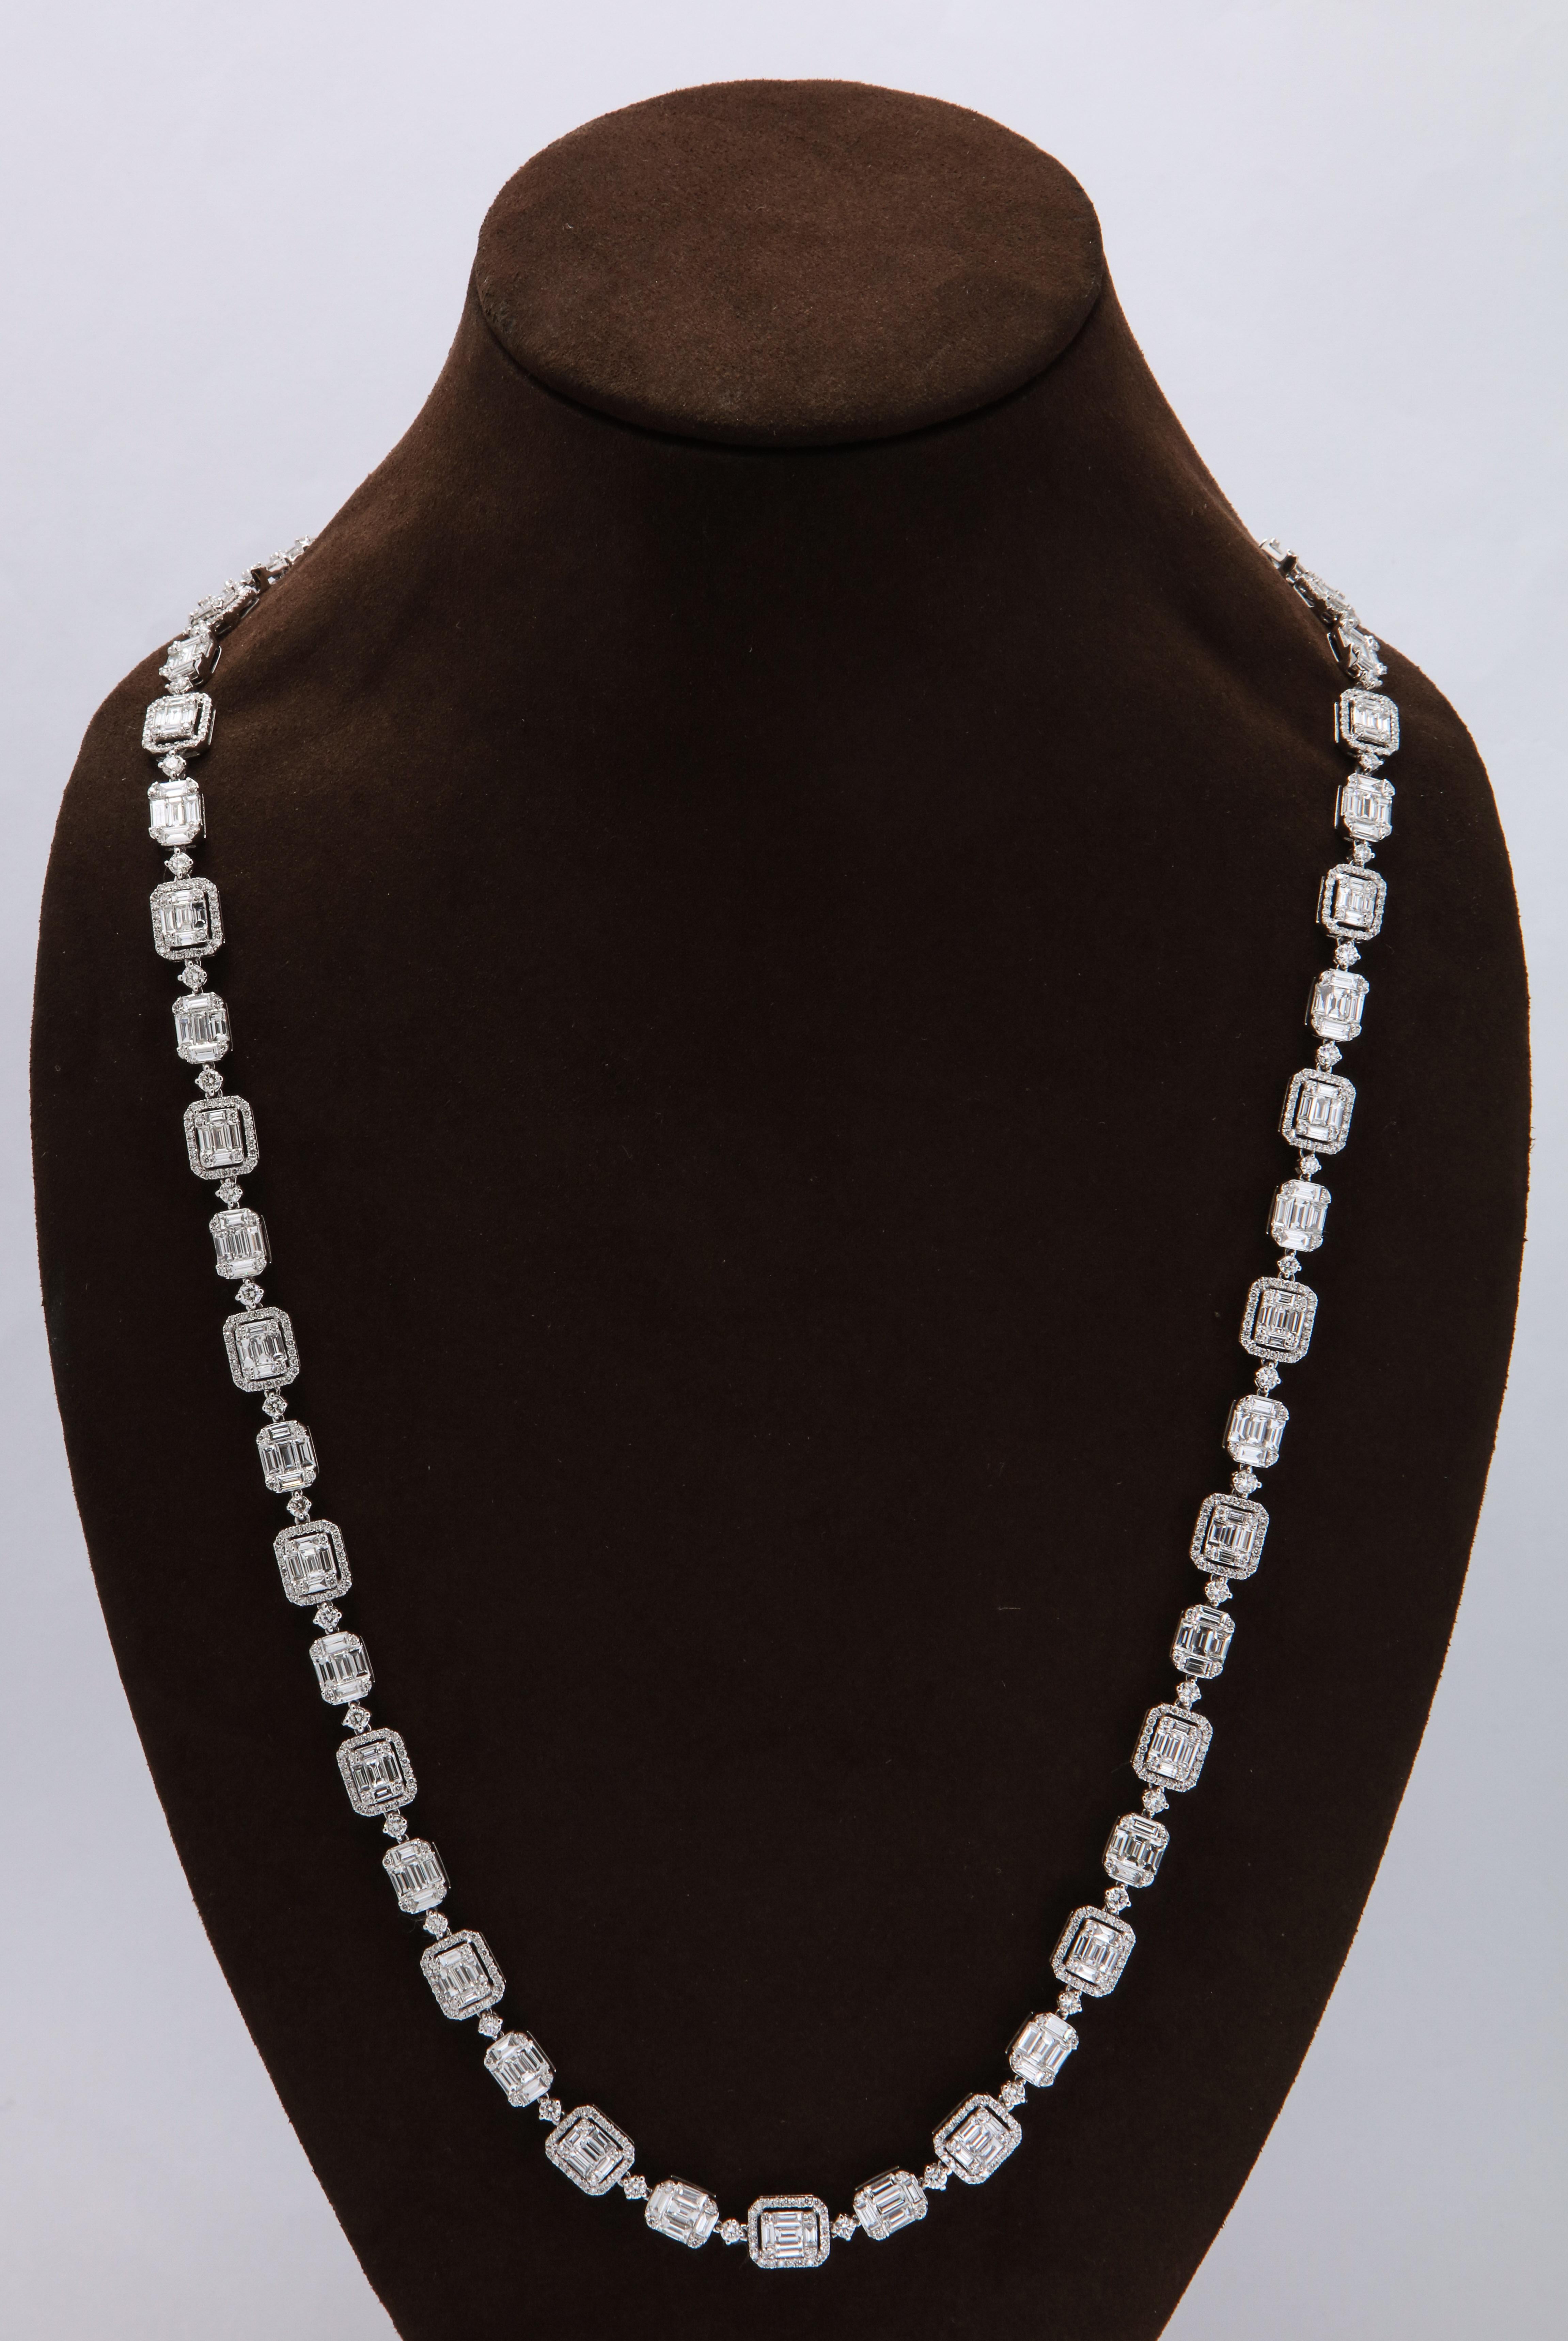 
A FABULOUS piece with many wearable options!!  

This necklace was designed with multiple locks so that it can detach and be worn as a 25 inch necklace WITH a 7 inch bracelet as well!!

37.86 carats of round and special cut F color VS clarity